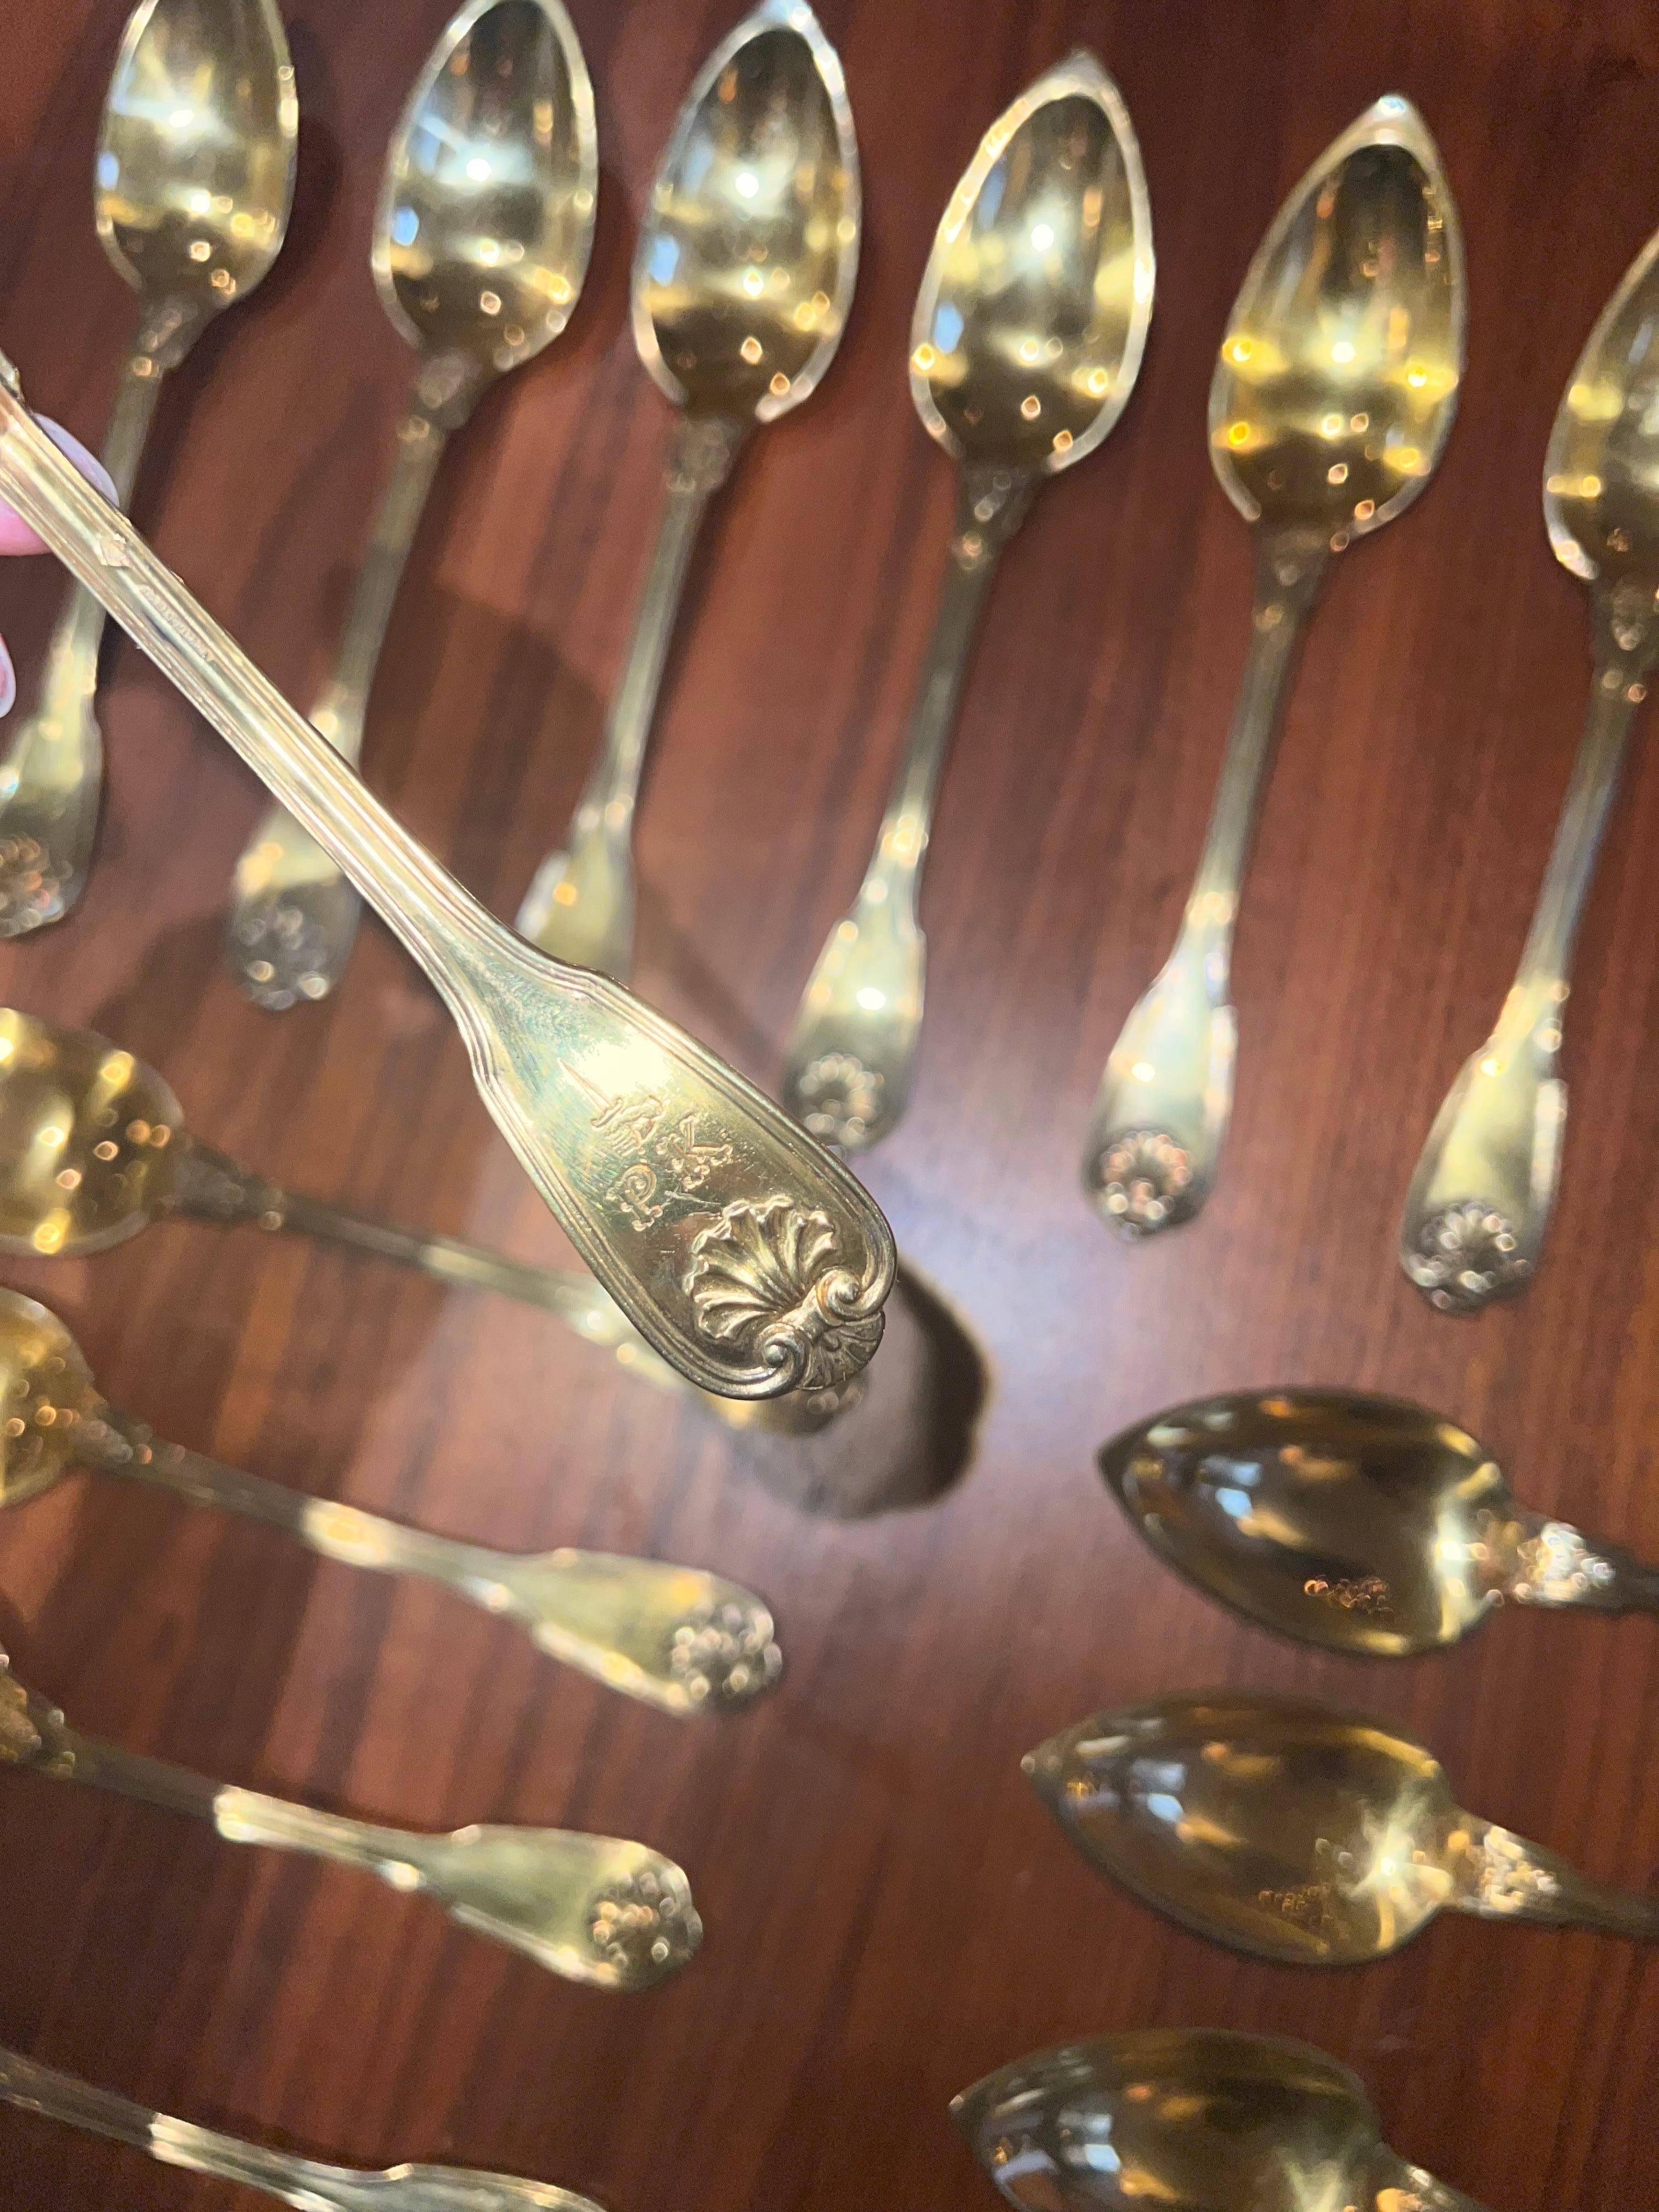 Mr. Giallo is opening his personal vault to sell a collection of his treasured antiques he's held on for so long.

ABOUT ITEM
Late 19th C. Shell Pattern Goldwash Sterling Silver 16 Spoons. Really fun and unique to have goldwash sterling silver. Why